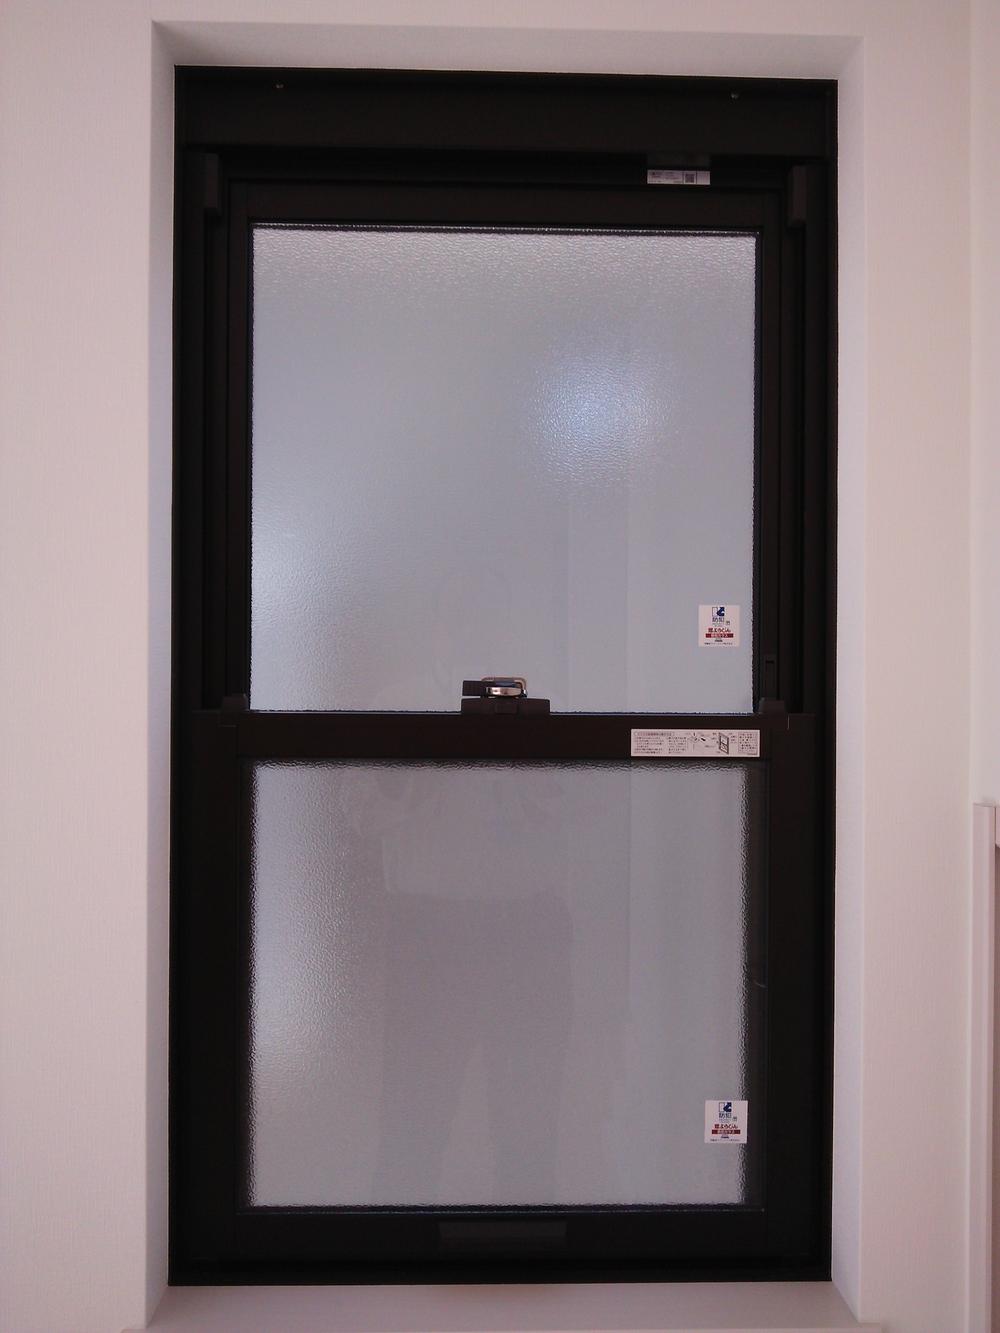 Security equipment. Crime prevention combined multi-layer glass!